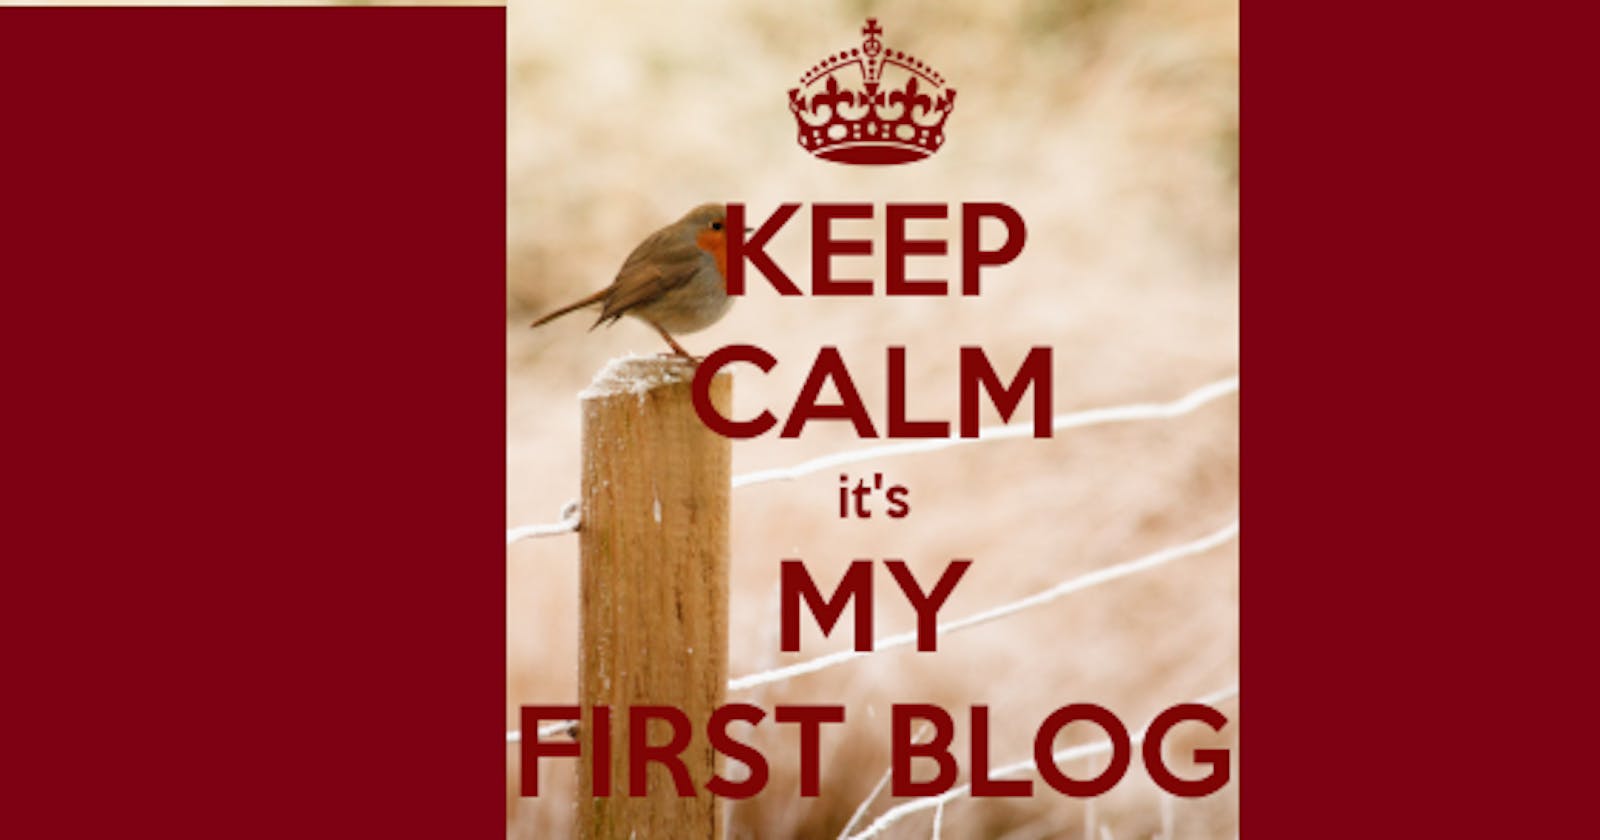 Why starting a blog?